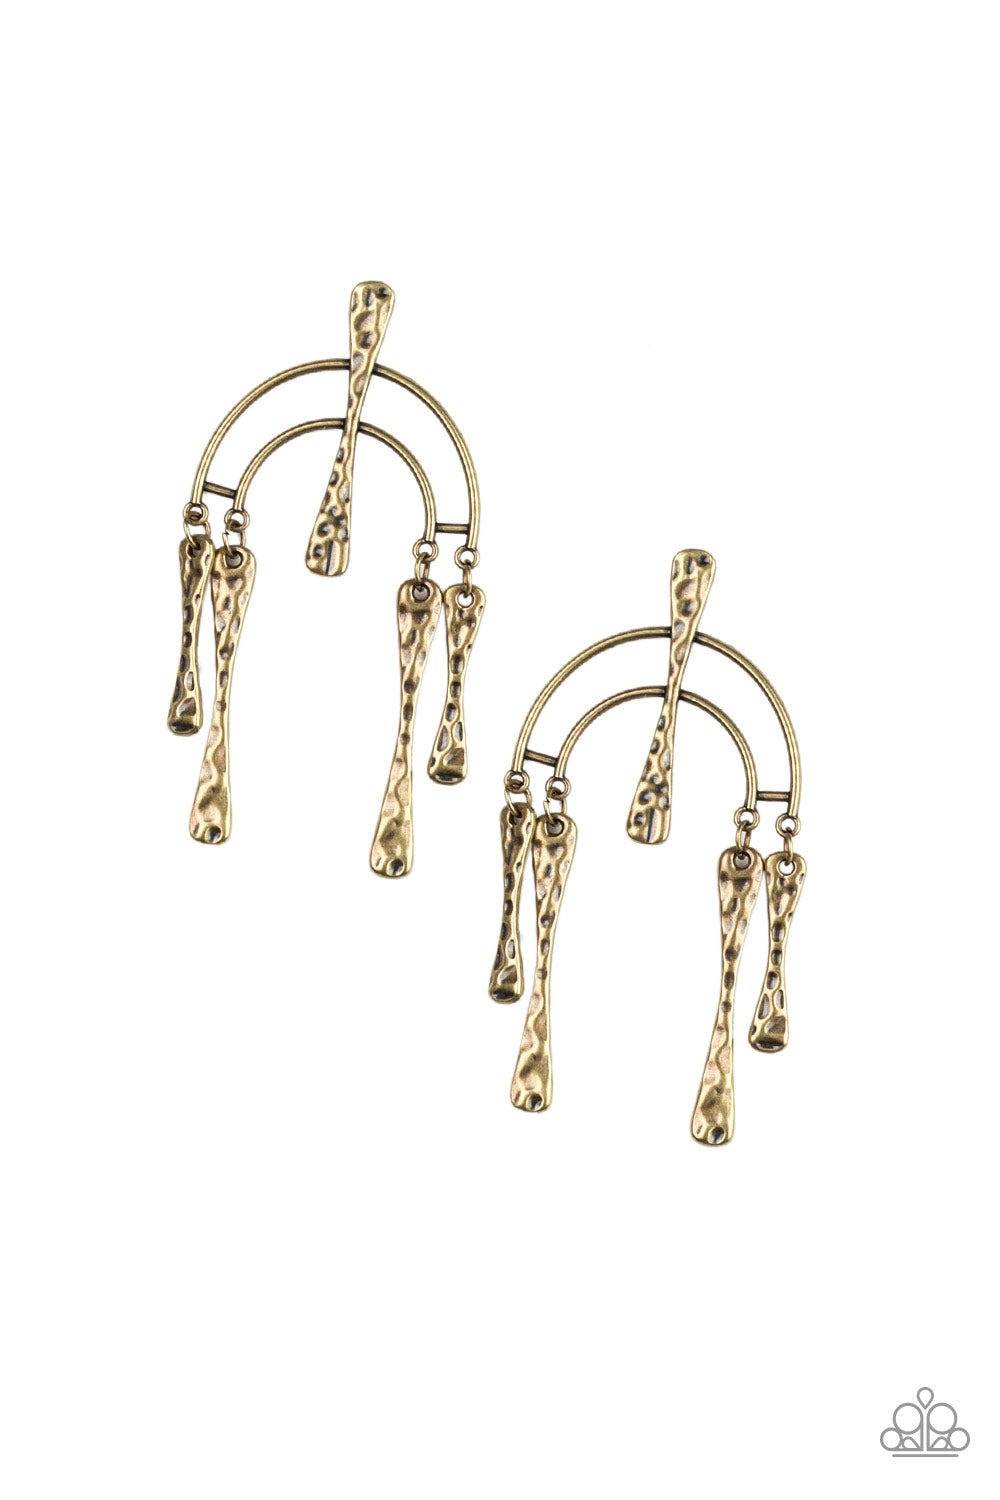 ARTIFACTS Of Life - Brass Earrings - Paparazzi Accessories - Hammered bars dangle from the ends of a bowing brass frame, creating an abstract lure. A matching brass bar adorns the center of the frame for a handcrafted finish. Earring attaches to a standard post fitting. Sold as one pair of post earrings.